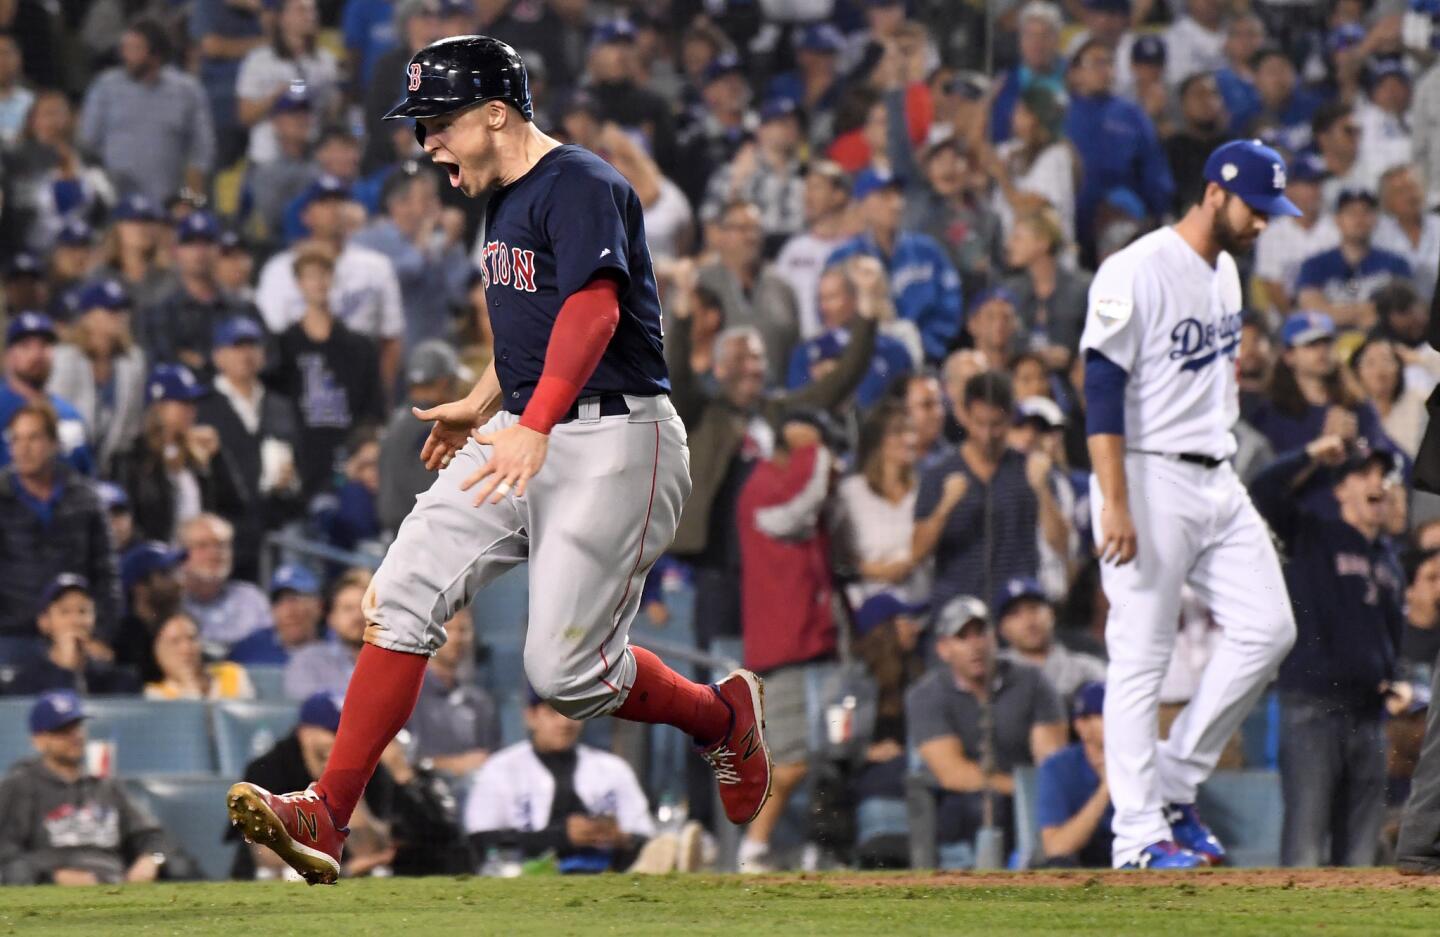 Red Sox base runner Brock Holt celebrates the go-ahead run in the 9th inning as Dodger reliever Dylan Floro walks back to the mound in the 9th inning.